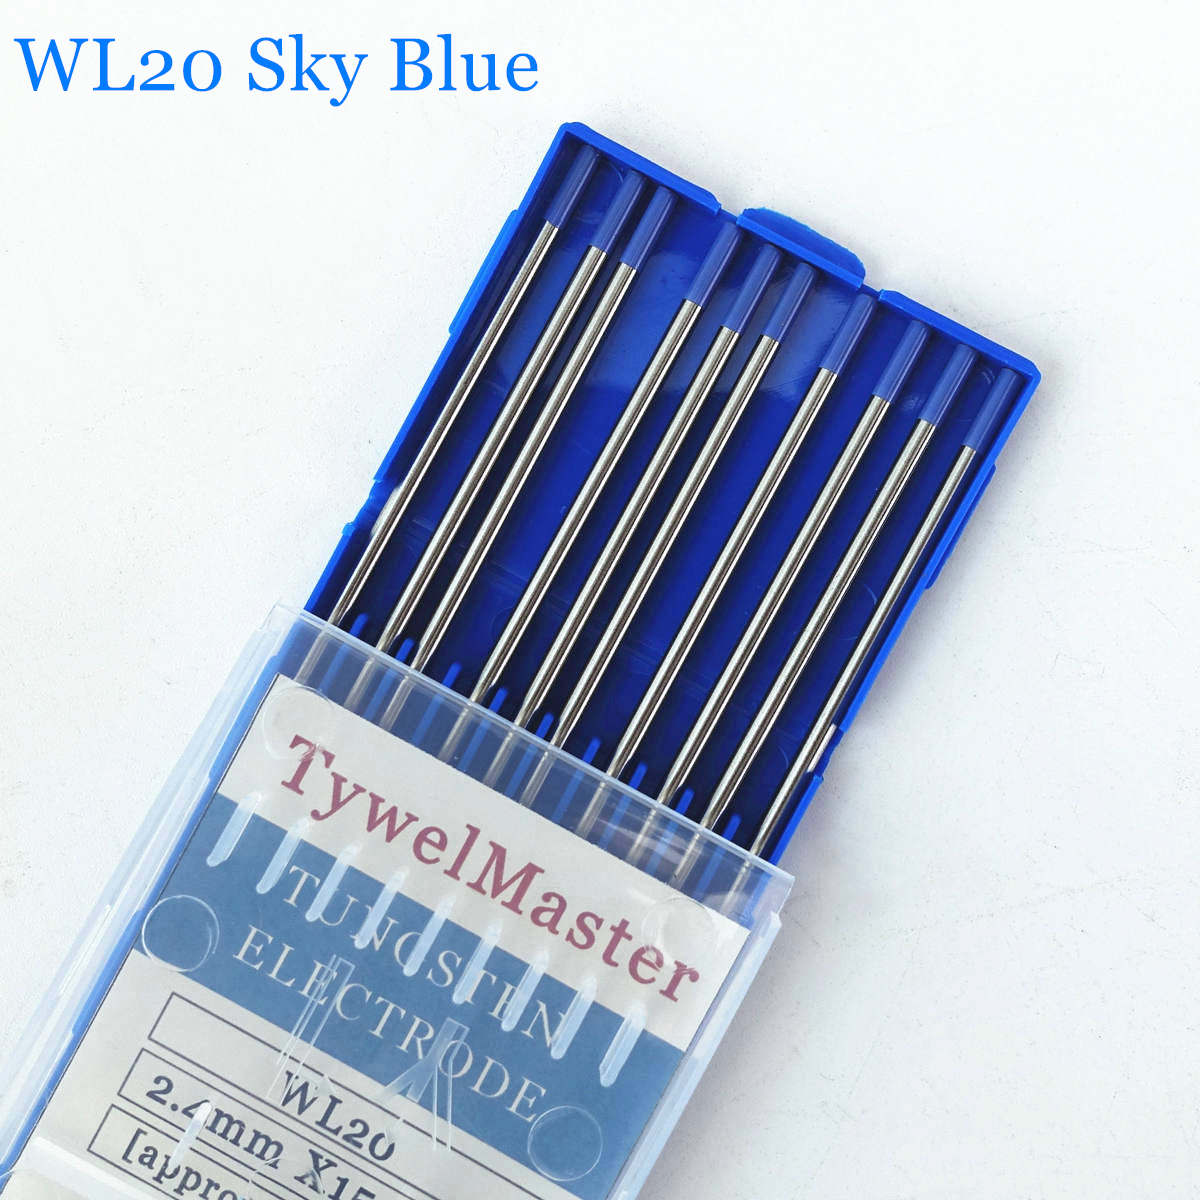 Tungsten Electrodes Welding Electrodes WT20 WC20 WL20 WL15 WZ8 WP WY20 WR20 E3 1.6mm 2.4mm 3.2mm Tig Rods